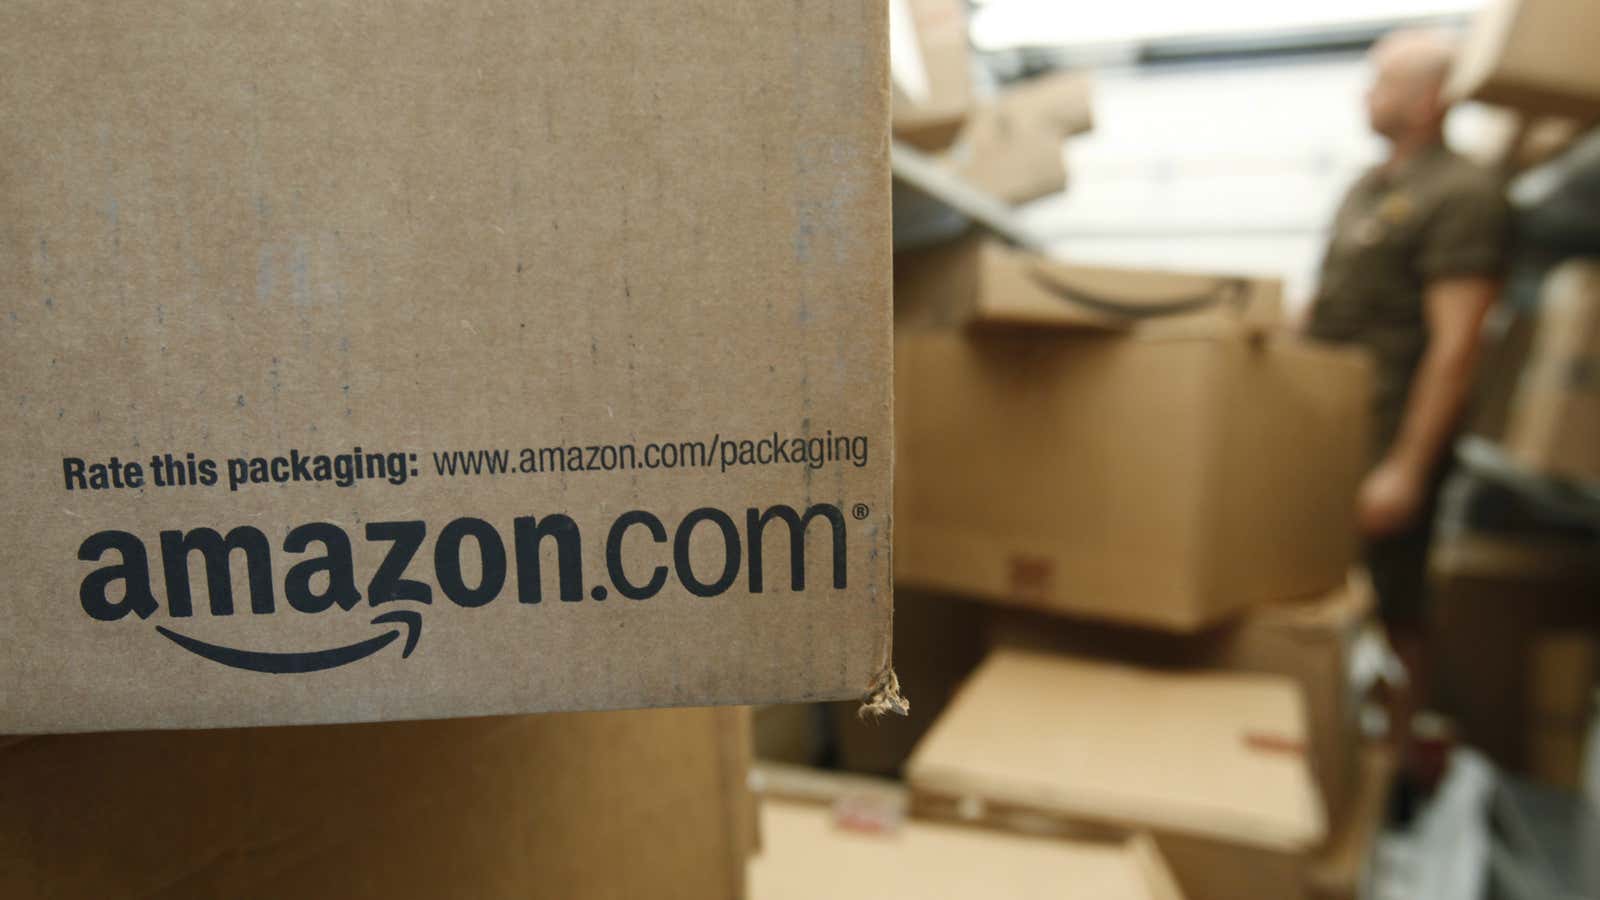 Amazon joins Walmart and Costco as retailers who bring in at least $100 billion in sales.